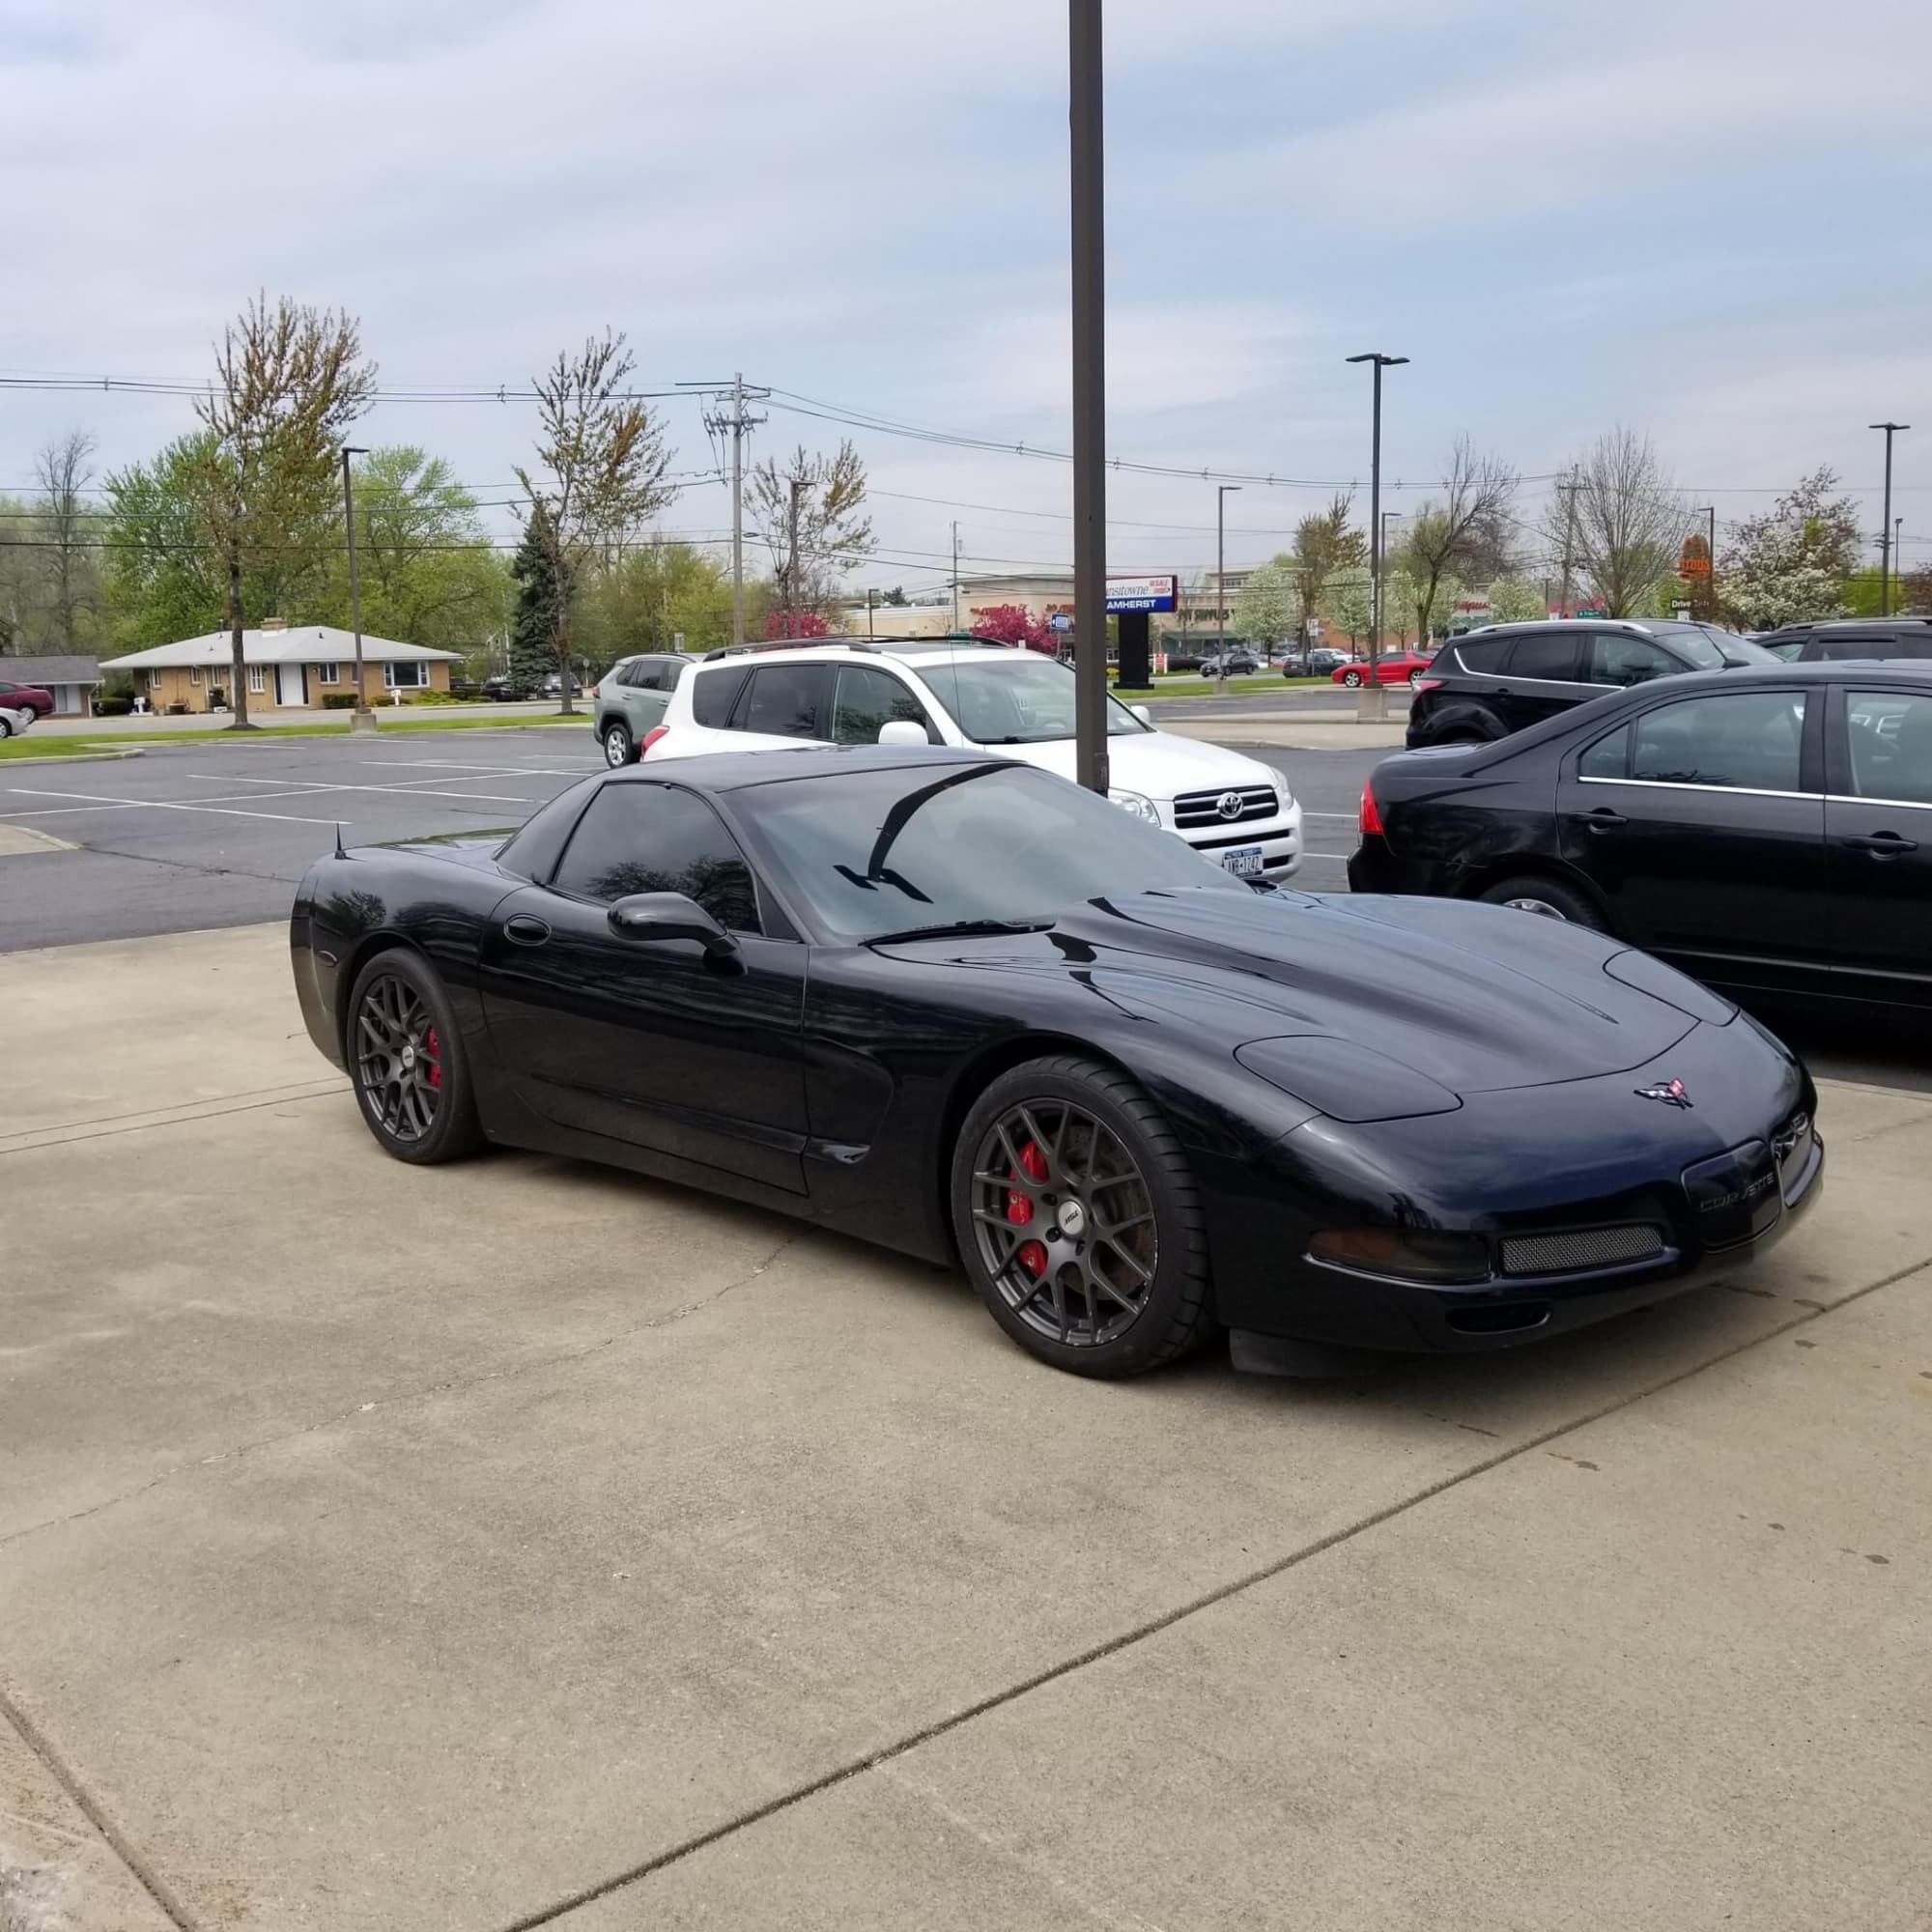 2000 Chevrolet Corvette - 2000 FRC Corvette sold! - Used - VIN ????????????????? - 8 cyl - 2WD - Manual - Coupe - Black - Amhertst, NY 14228, United States